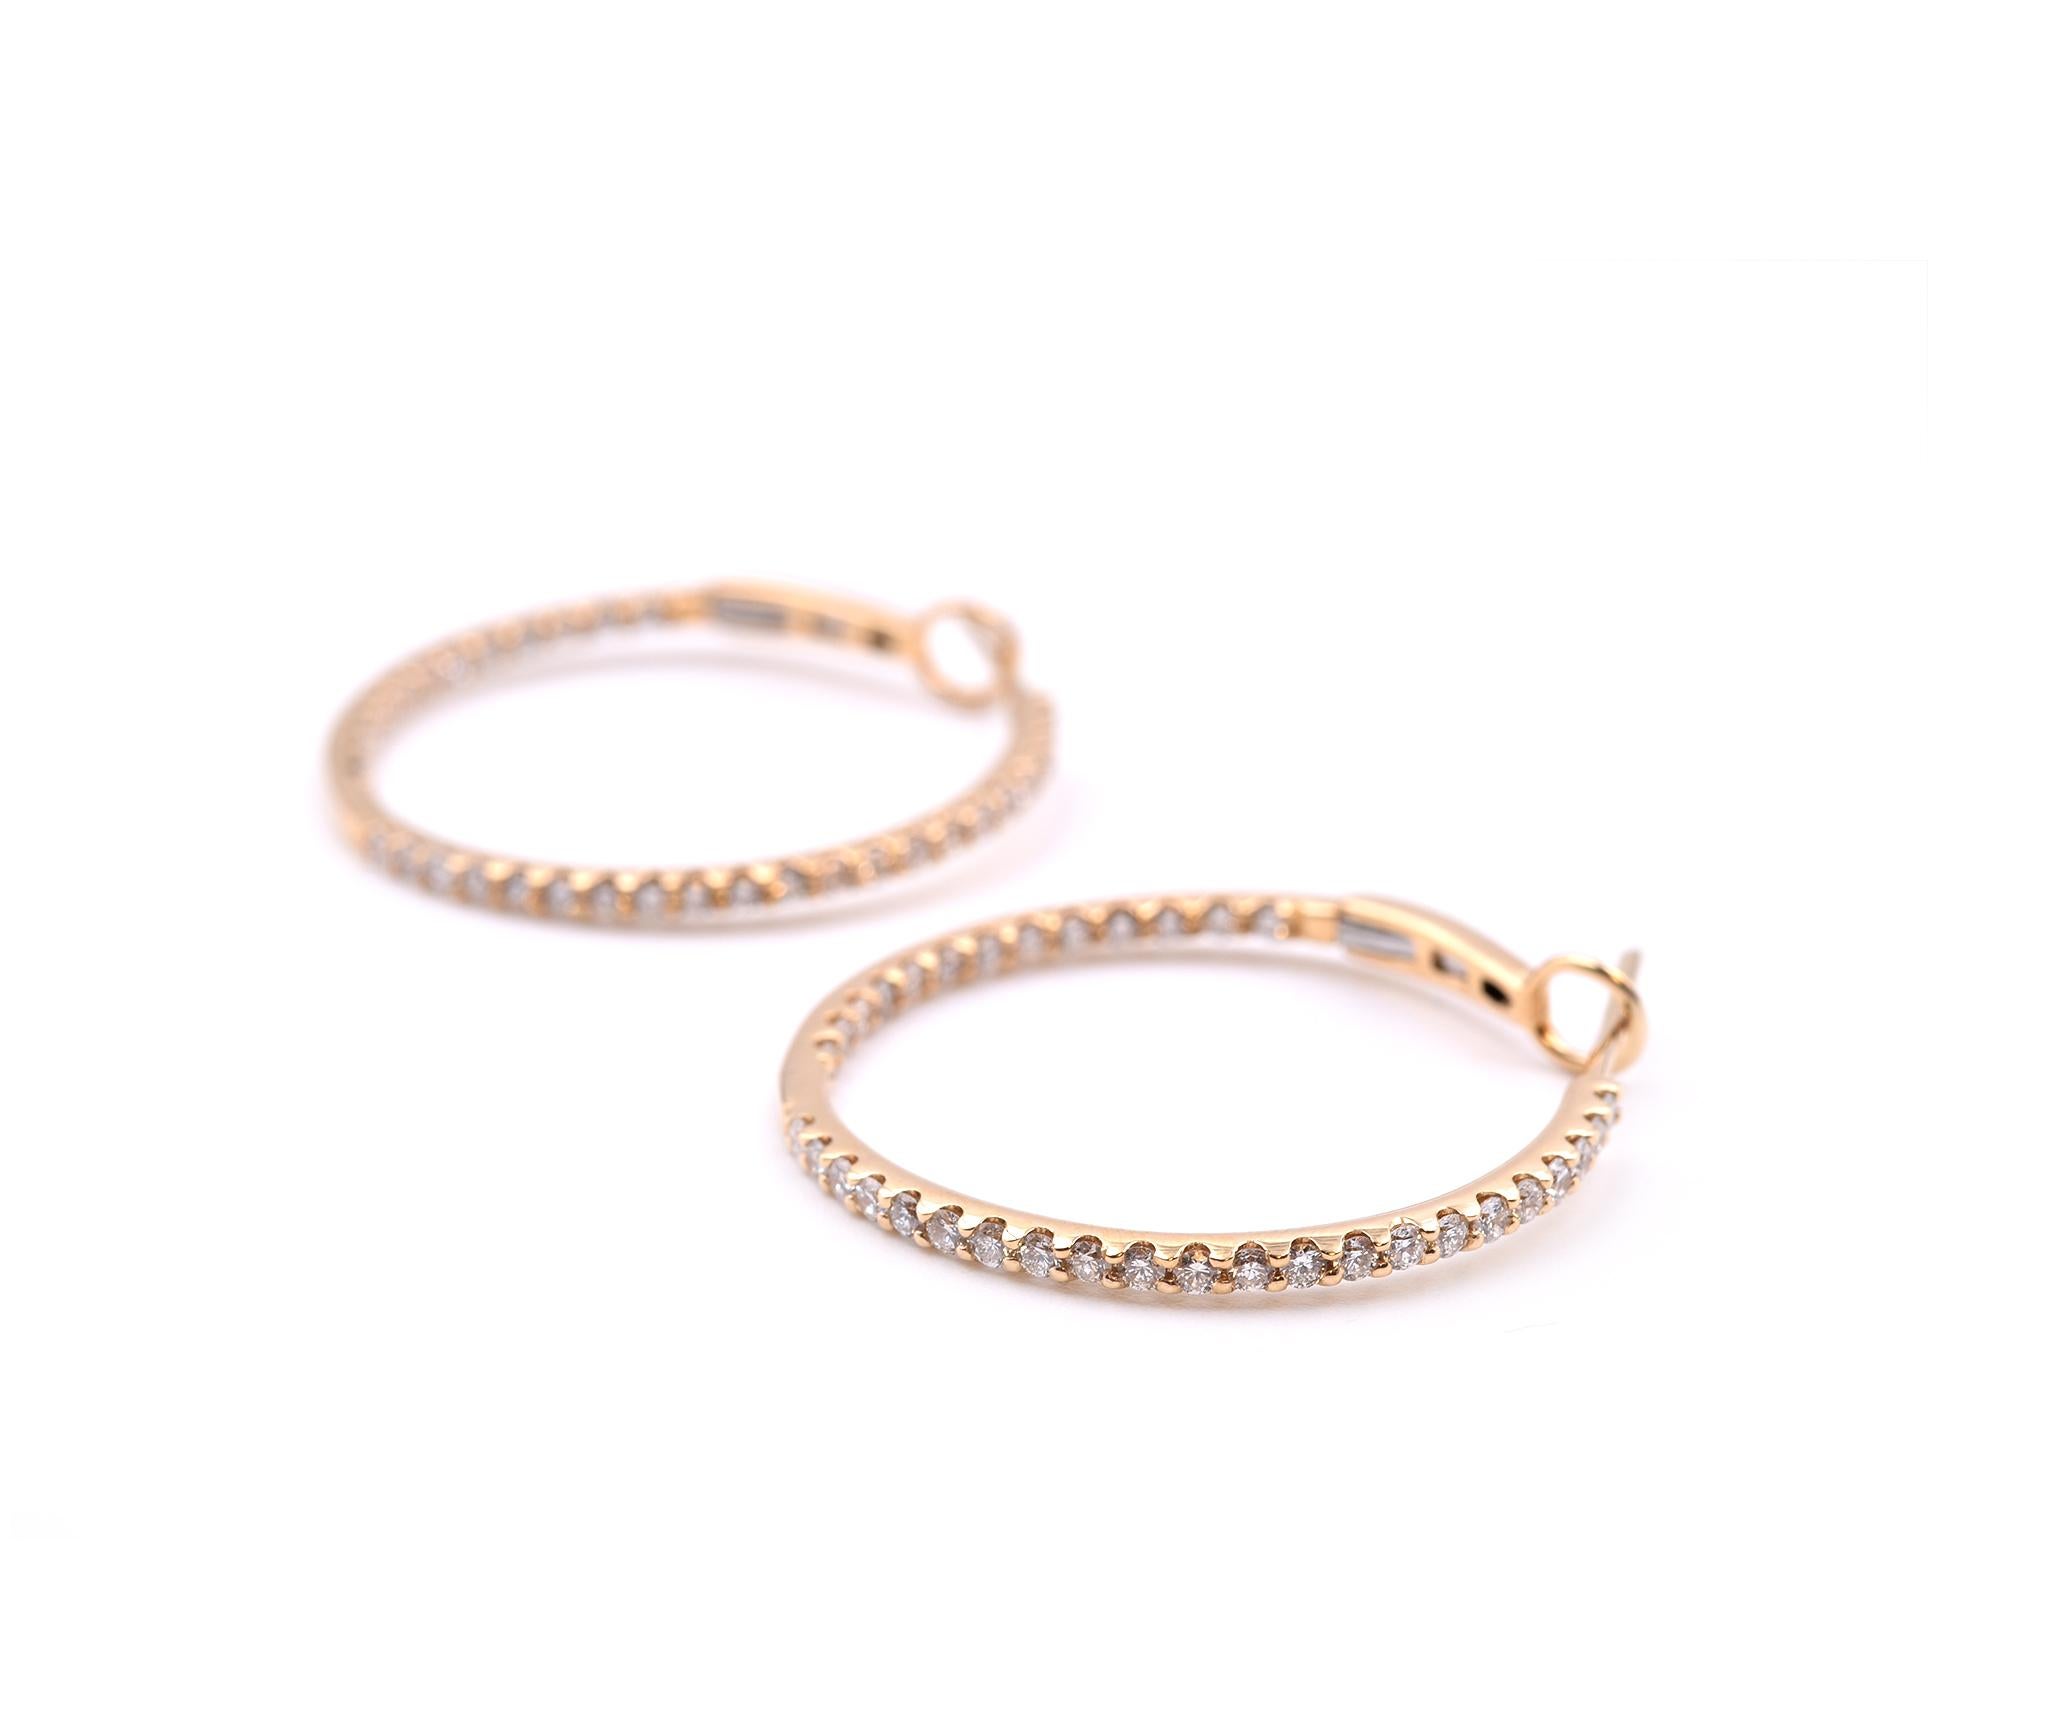 Designer: custom designed
Material: 18k yellow gold
Diamonds: 70 round brilliant cut= 1.36cttw
Color: G
Clarity: VS
Dimensions: earrings are approximately 30.46mm by 1.75mm
Fastenings: post with hinged omega back
Weight: 6.40 grams
